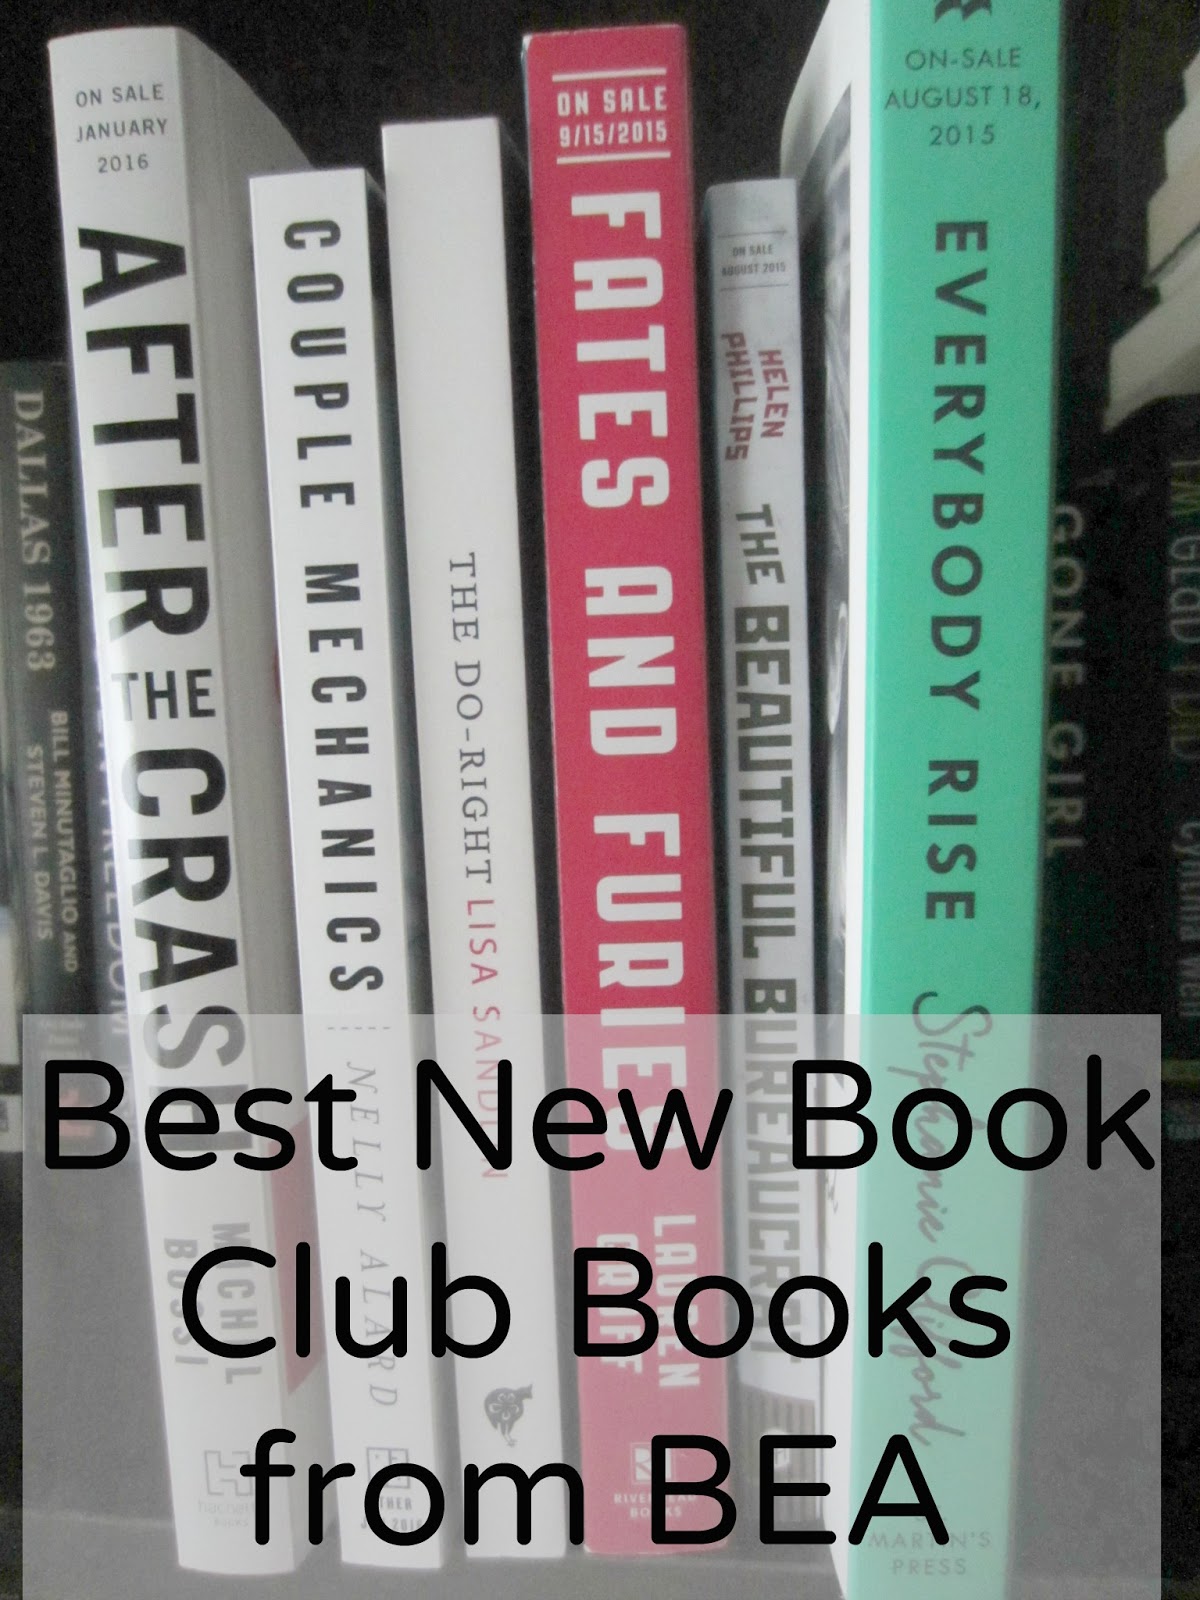 Best New Book Club Books from BEA